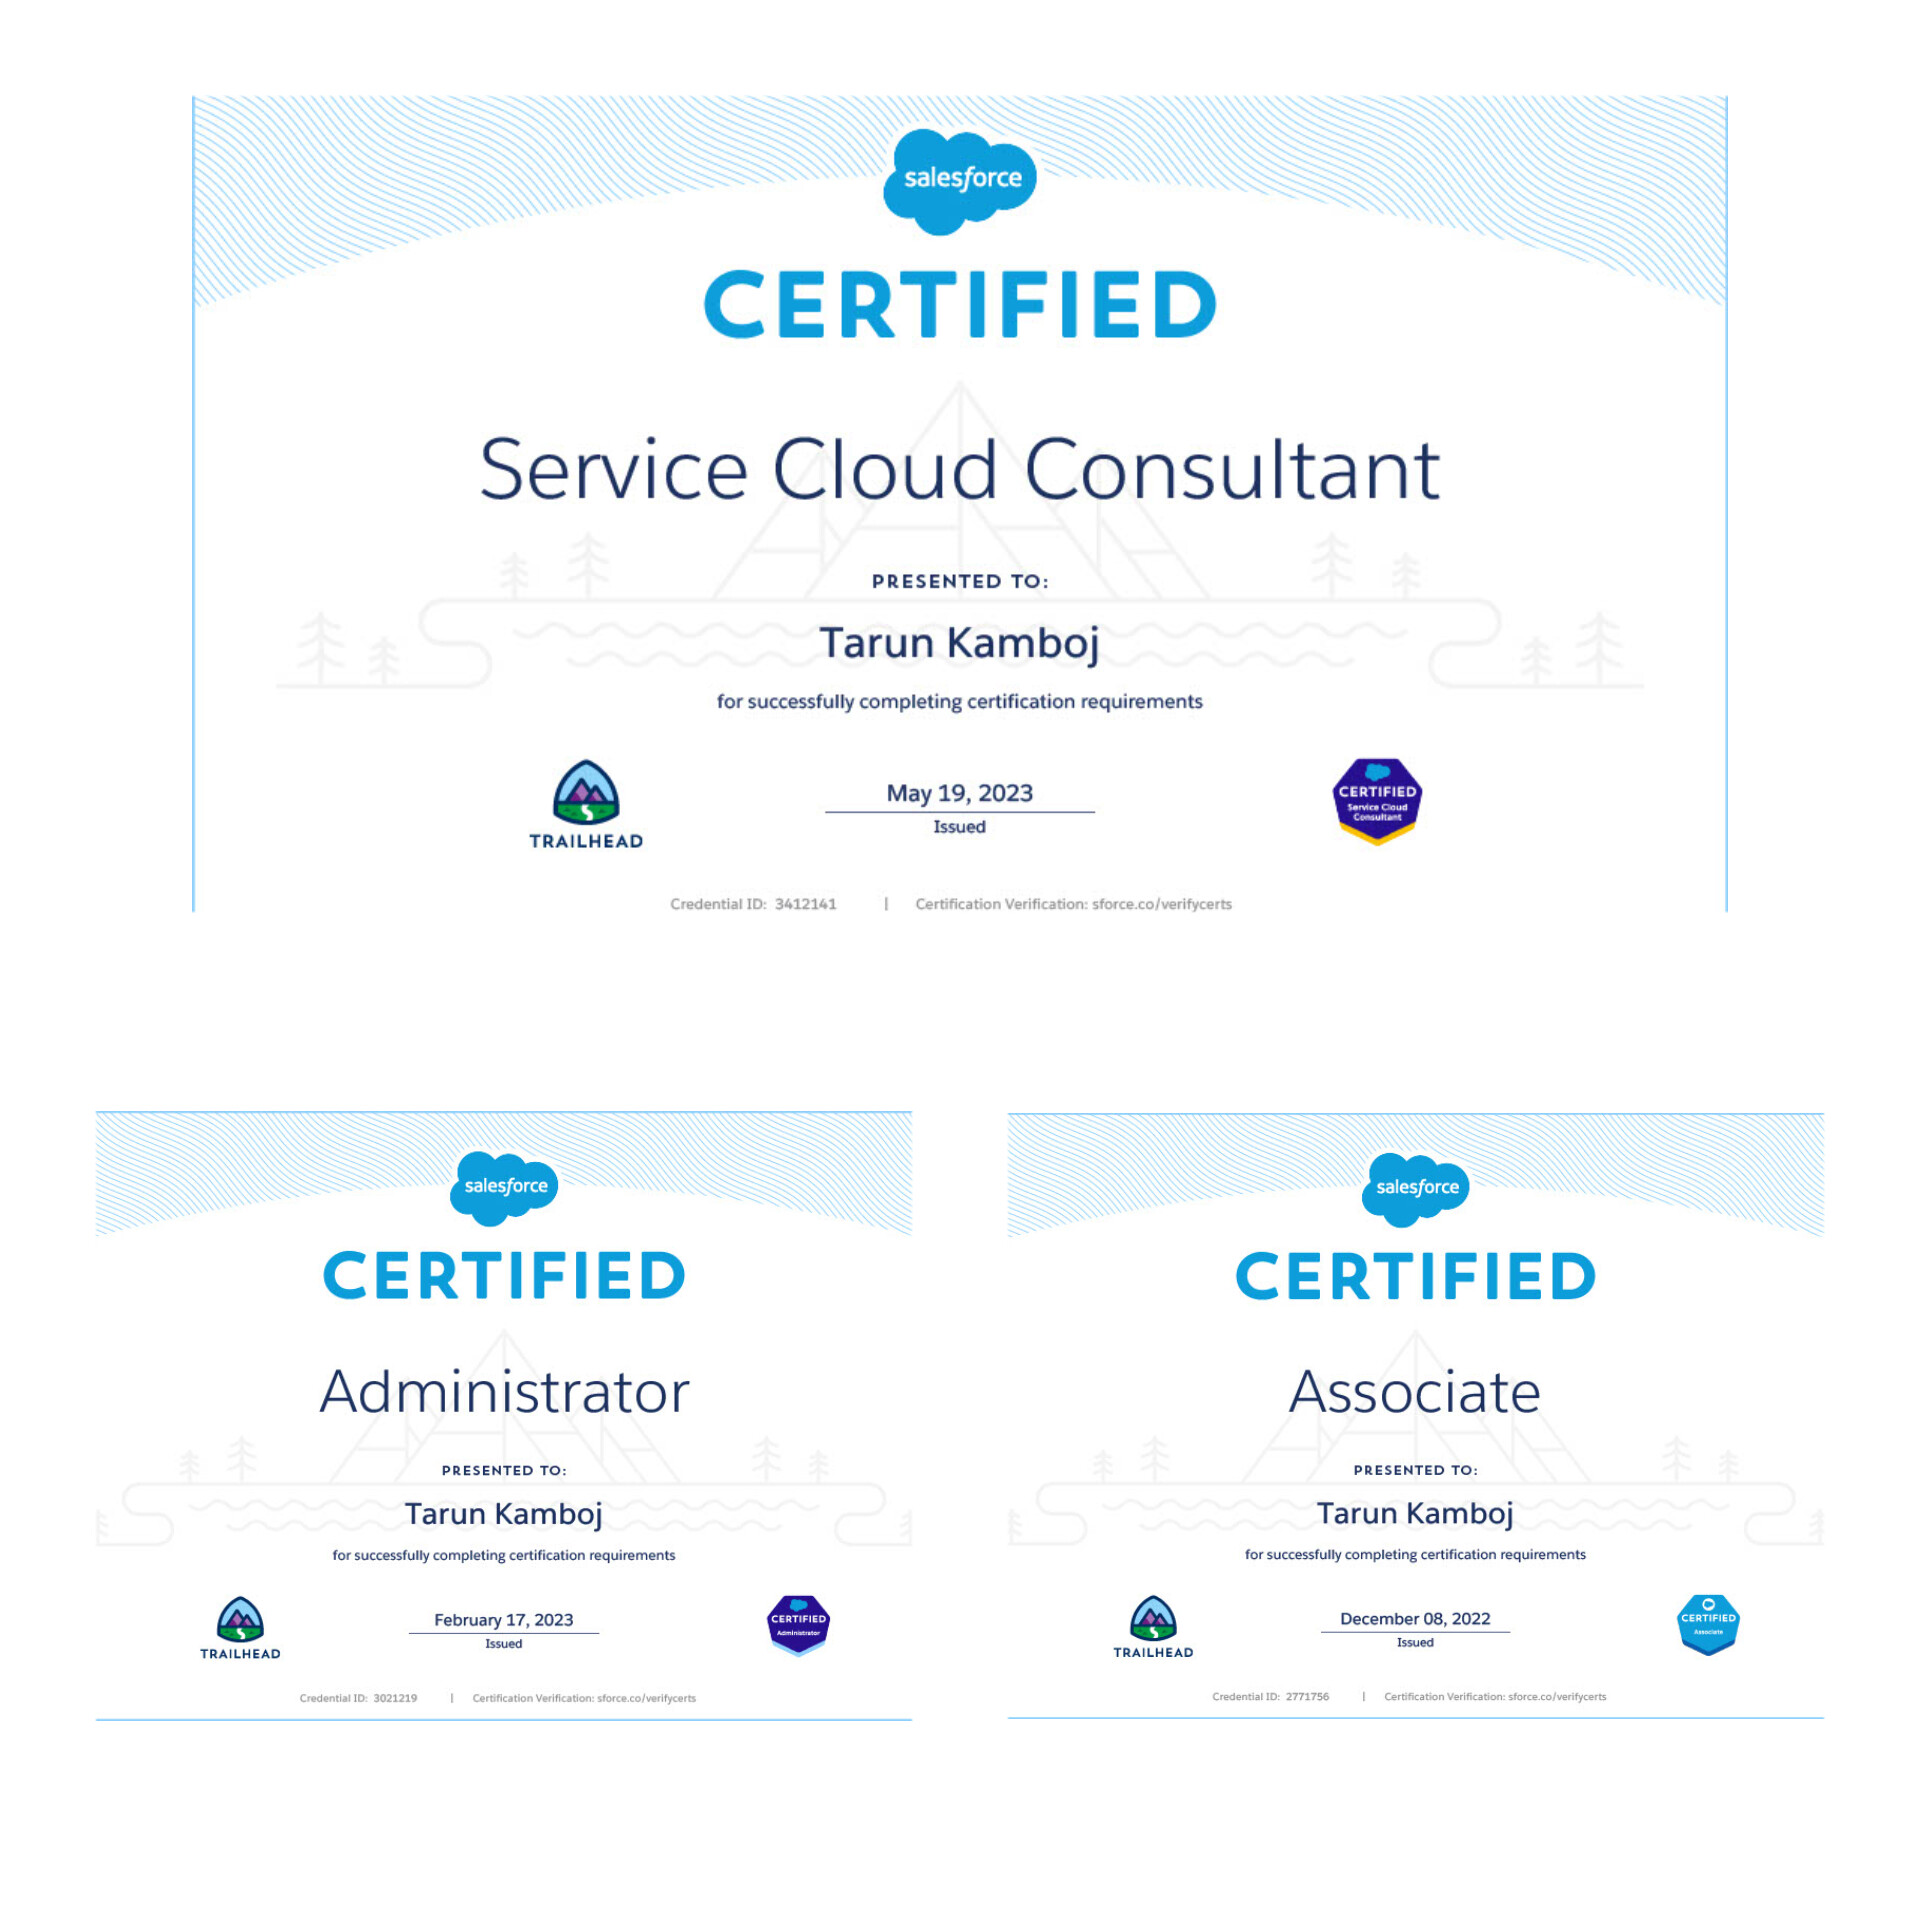 TRAILHEAD

CERTIFIED

Service Cloud Consultant

PRESENTED TO:

Tarun Kamboj

for successfully completing certification requirements

7 May 19, 2023 £55
Issued
TRAILHEAD

& &

CERTIFIED CERTIFIED

Administrator Associate
A AE TTT. ay AN
Tarun Kamboj Tarun Kamboj
ey ei— C2 EO TTT ena

TRAILHEAD